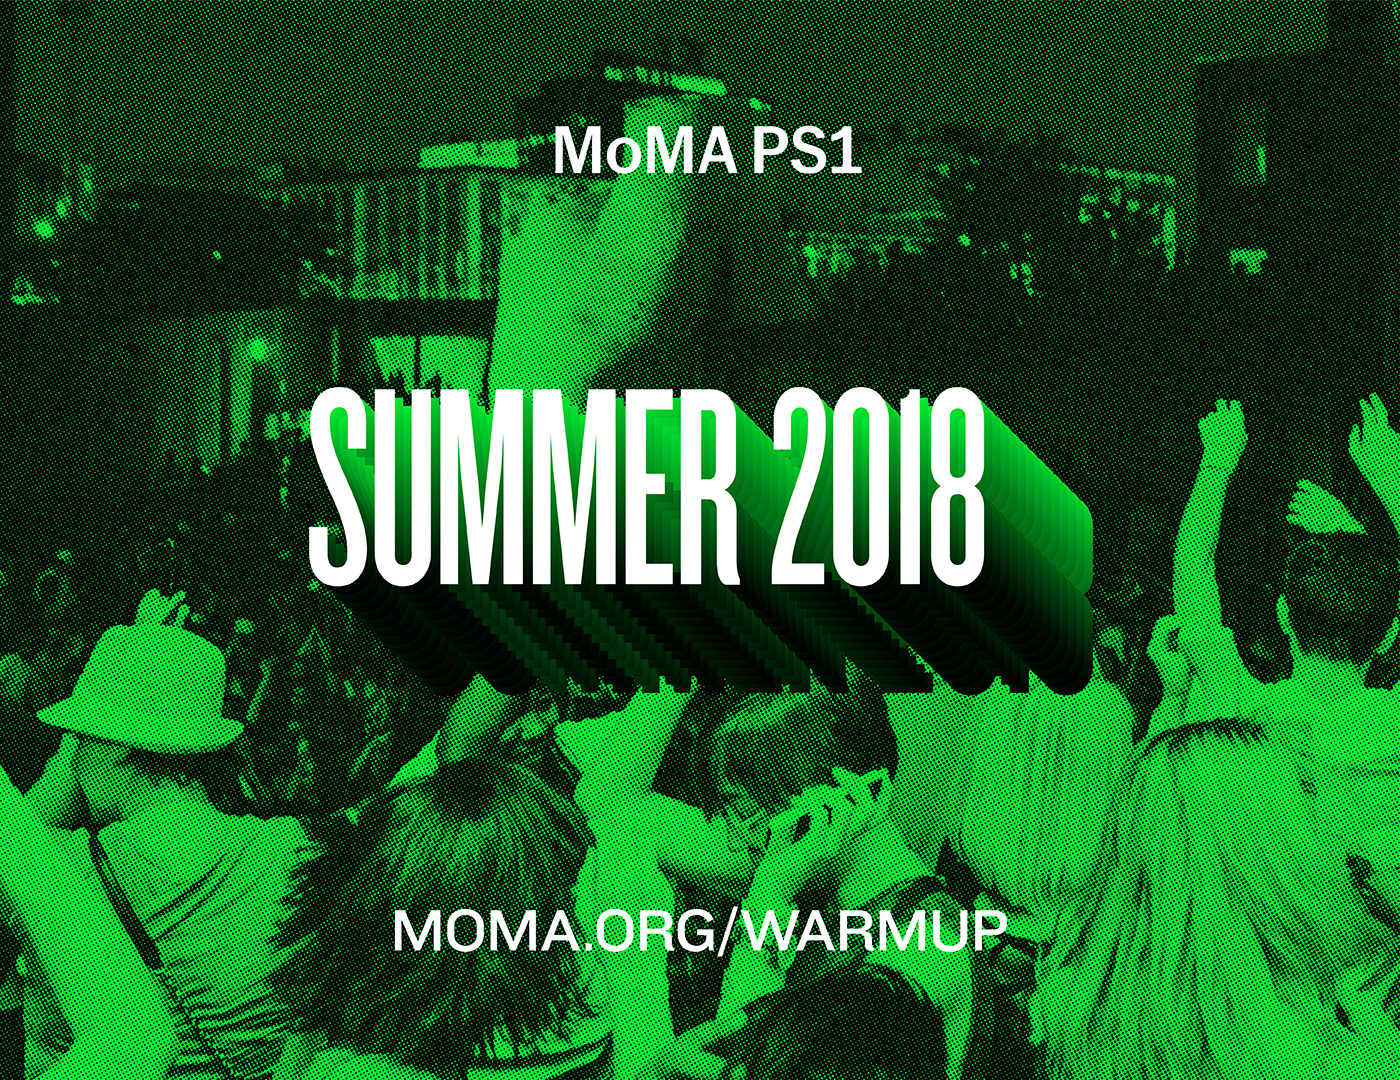 moma MoMa PS1 New York summer graphics typography   halftone Music Festival warm up poster